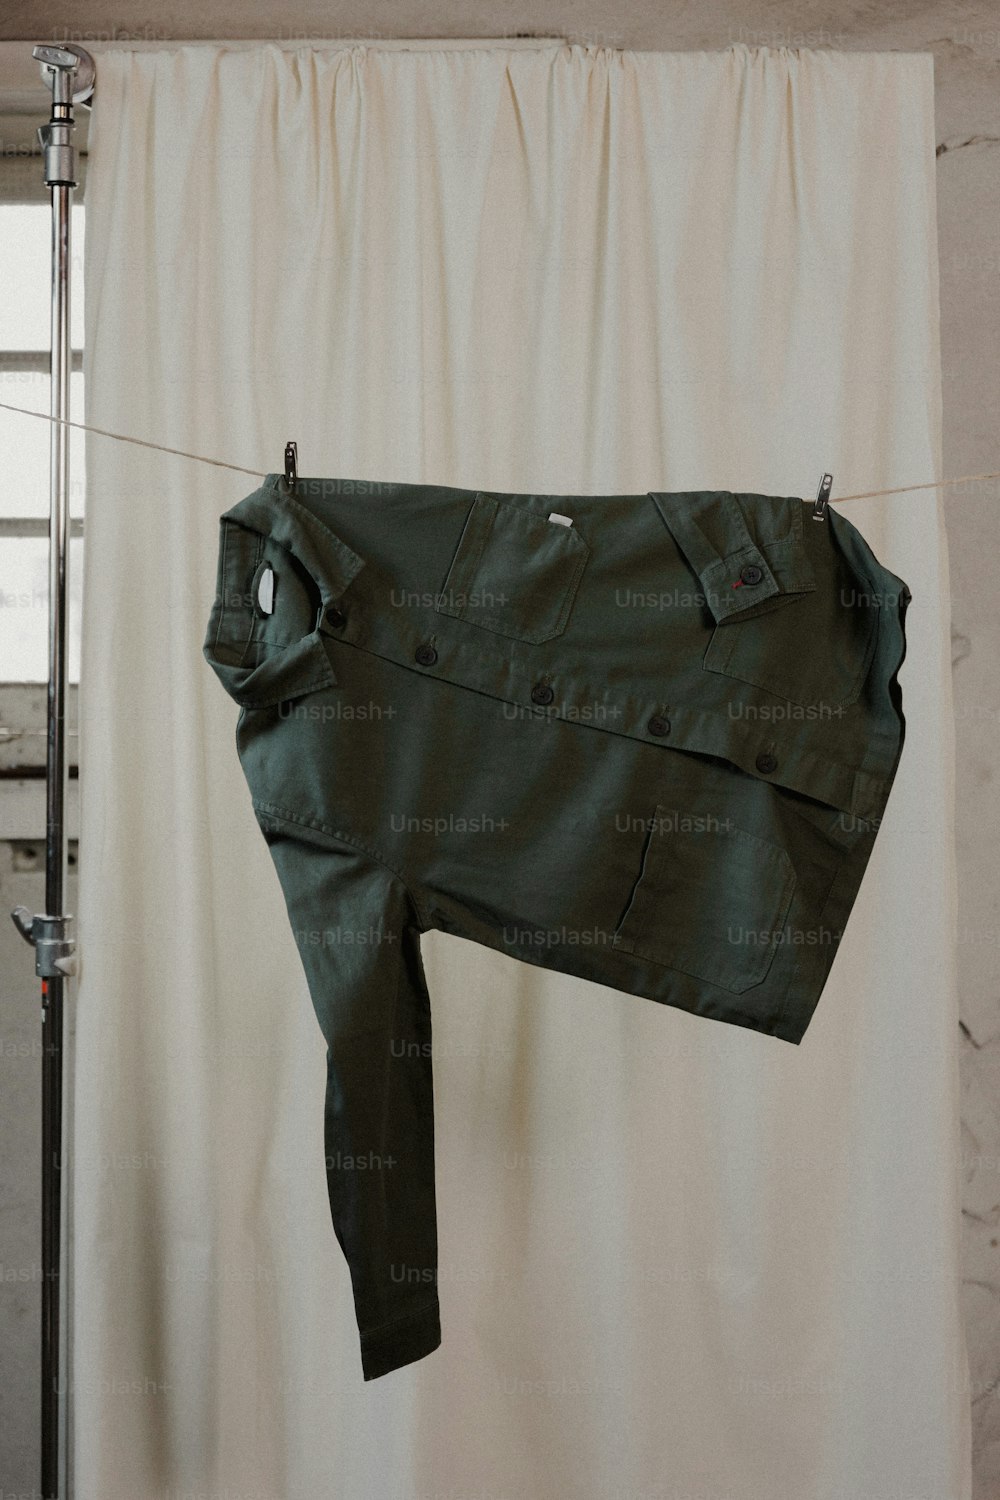 a pair of pants hanging on a clothes line